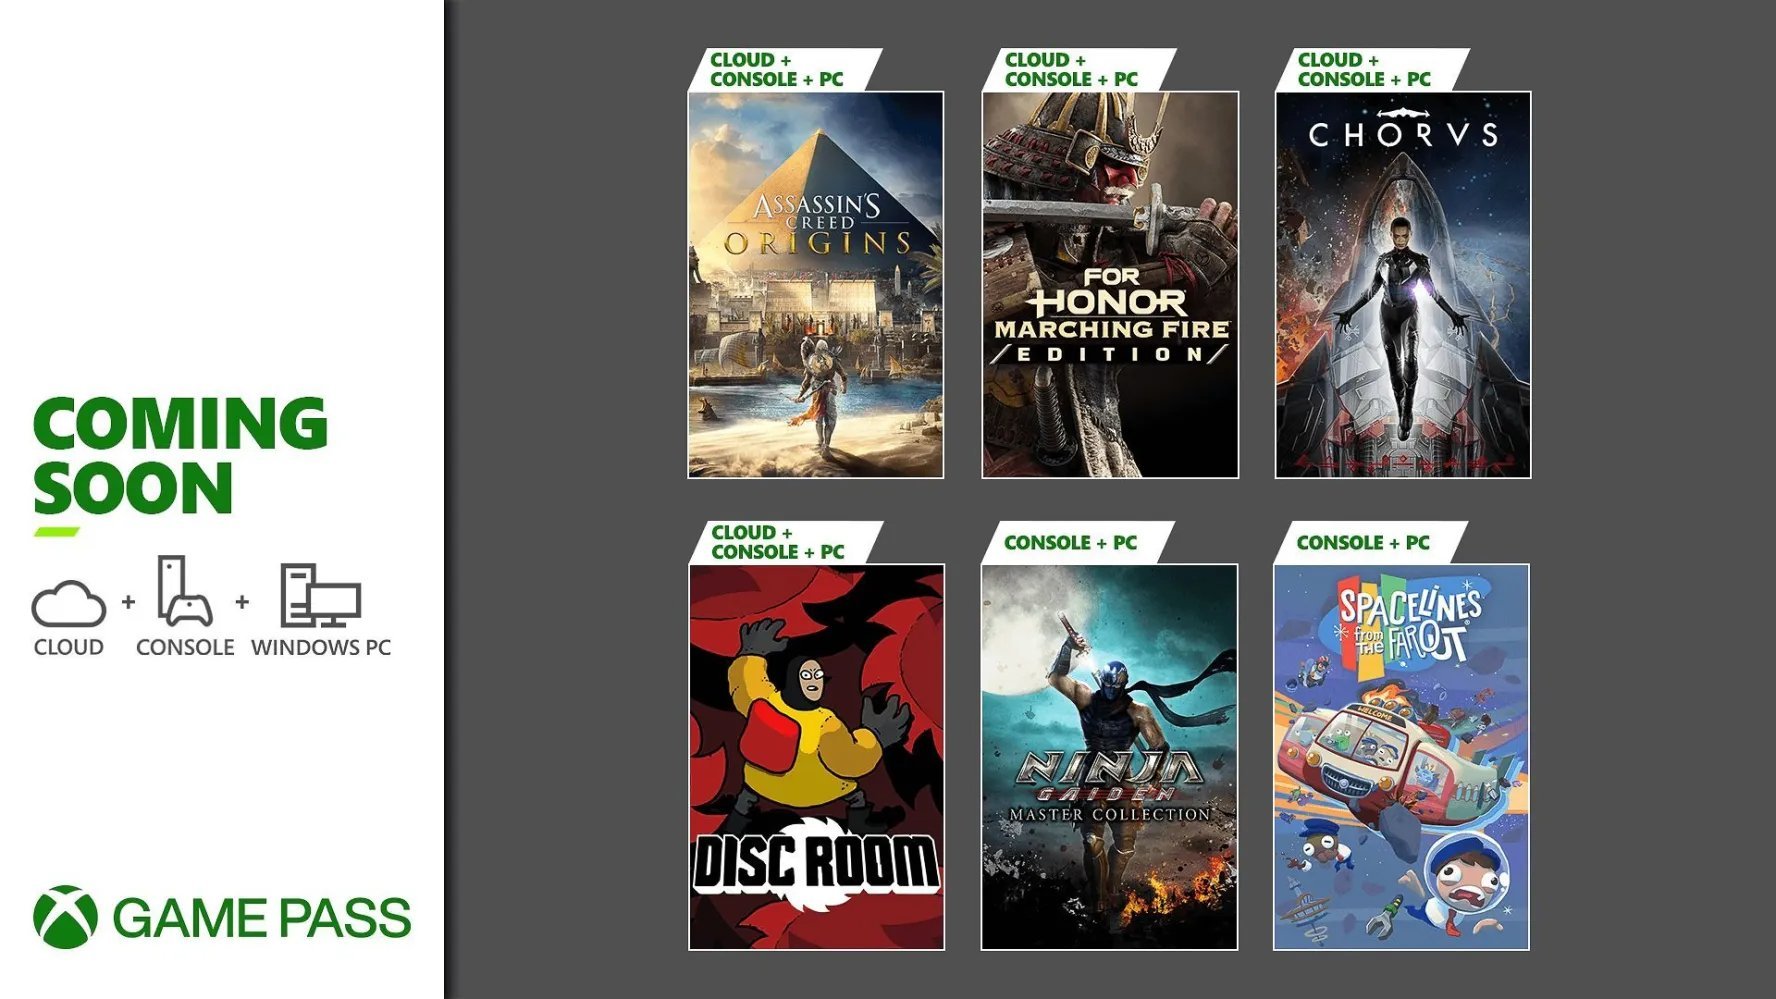 Xbox Game Pass June 2022 Lineup Includes Assassin’s Creed Origins